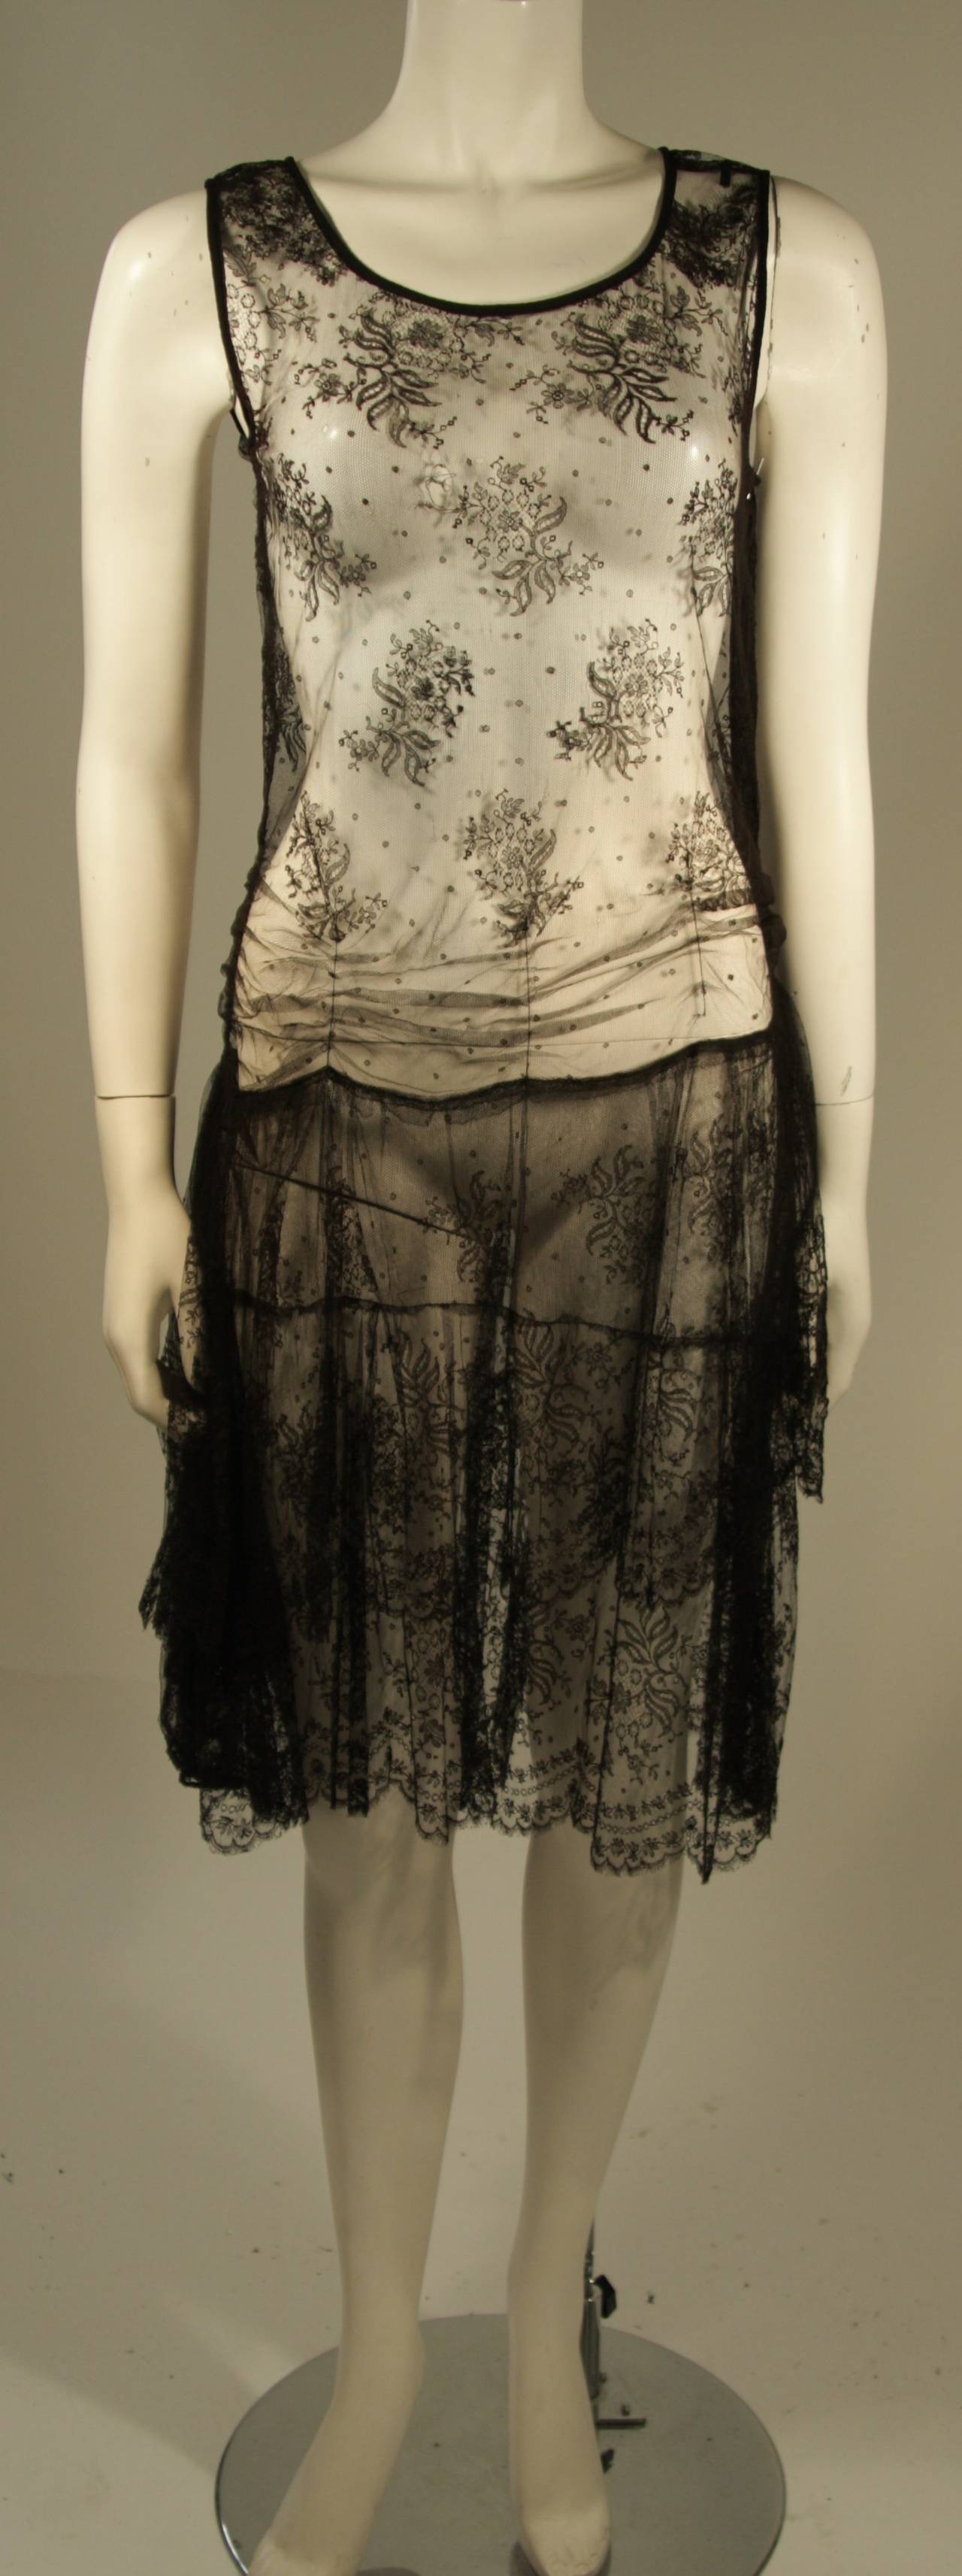 This dress is composed of a black French lace and features a drop waist design. A great piece. 

Measures (Approximately)
Length: 40.5